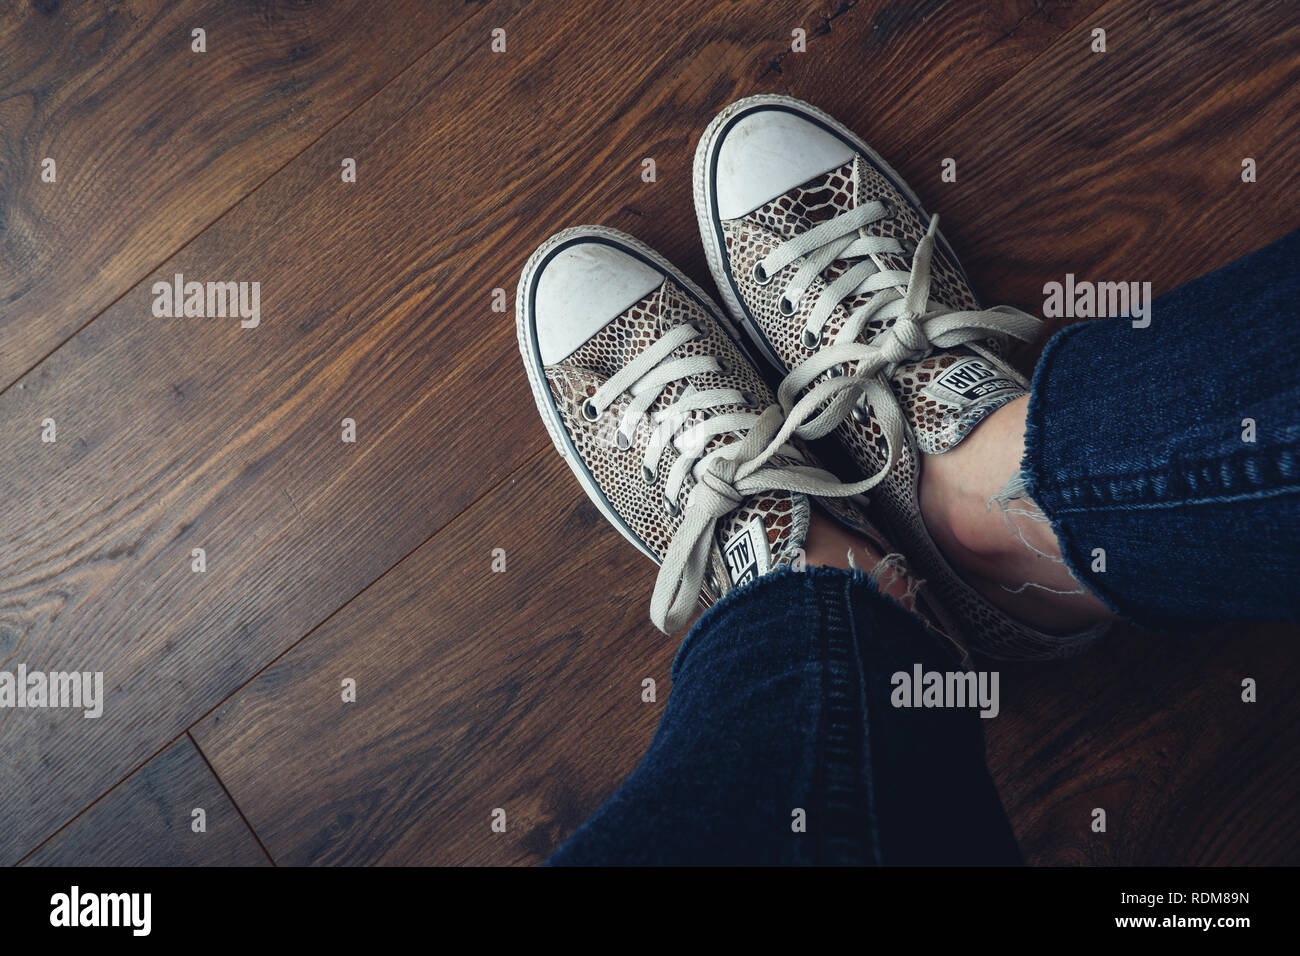 Converse all star shoes / trainers with an animal print, photographed  against wooden floor Stock Photo - Alamy